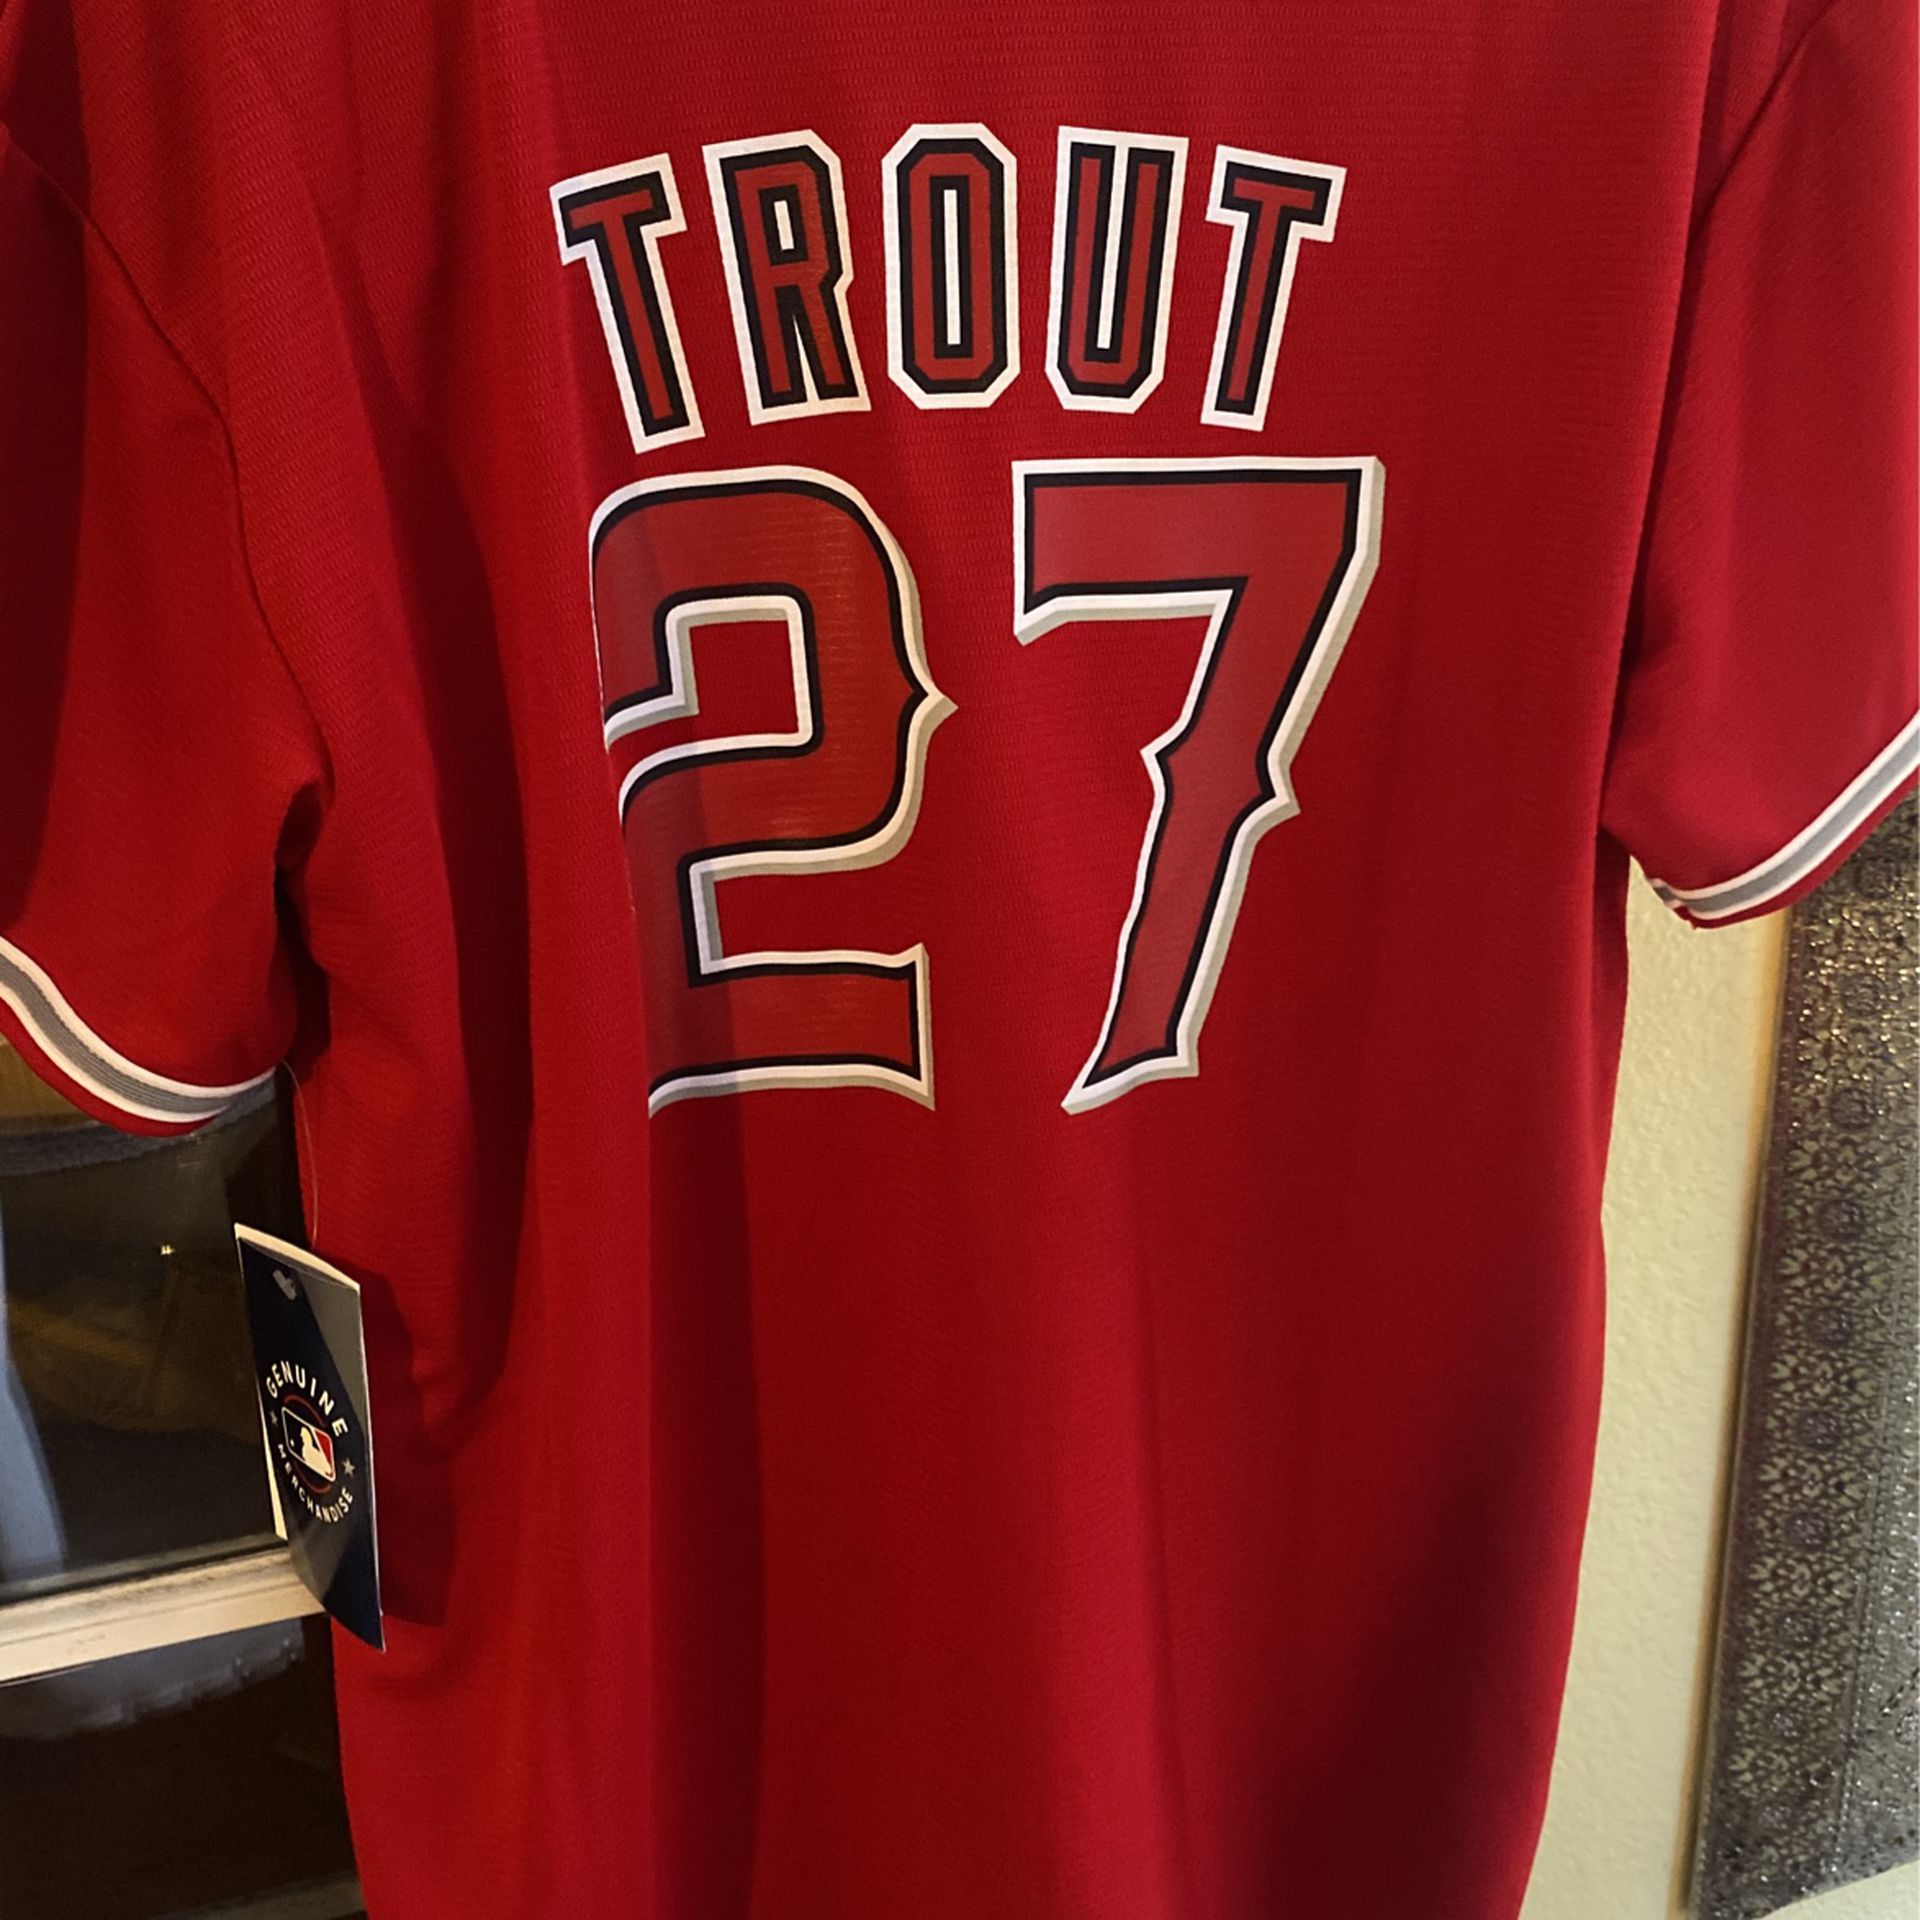 Kids Mike Trout Jersey for Sale in Anaheim, CA - OfferUp